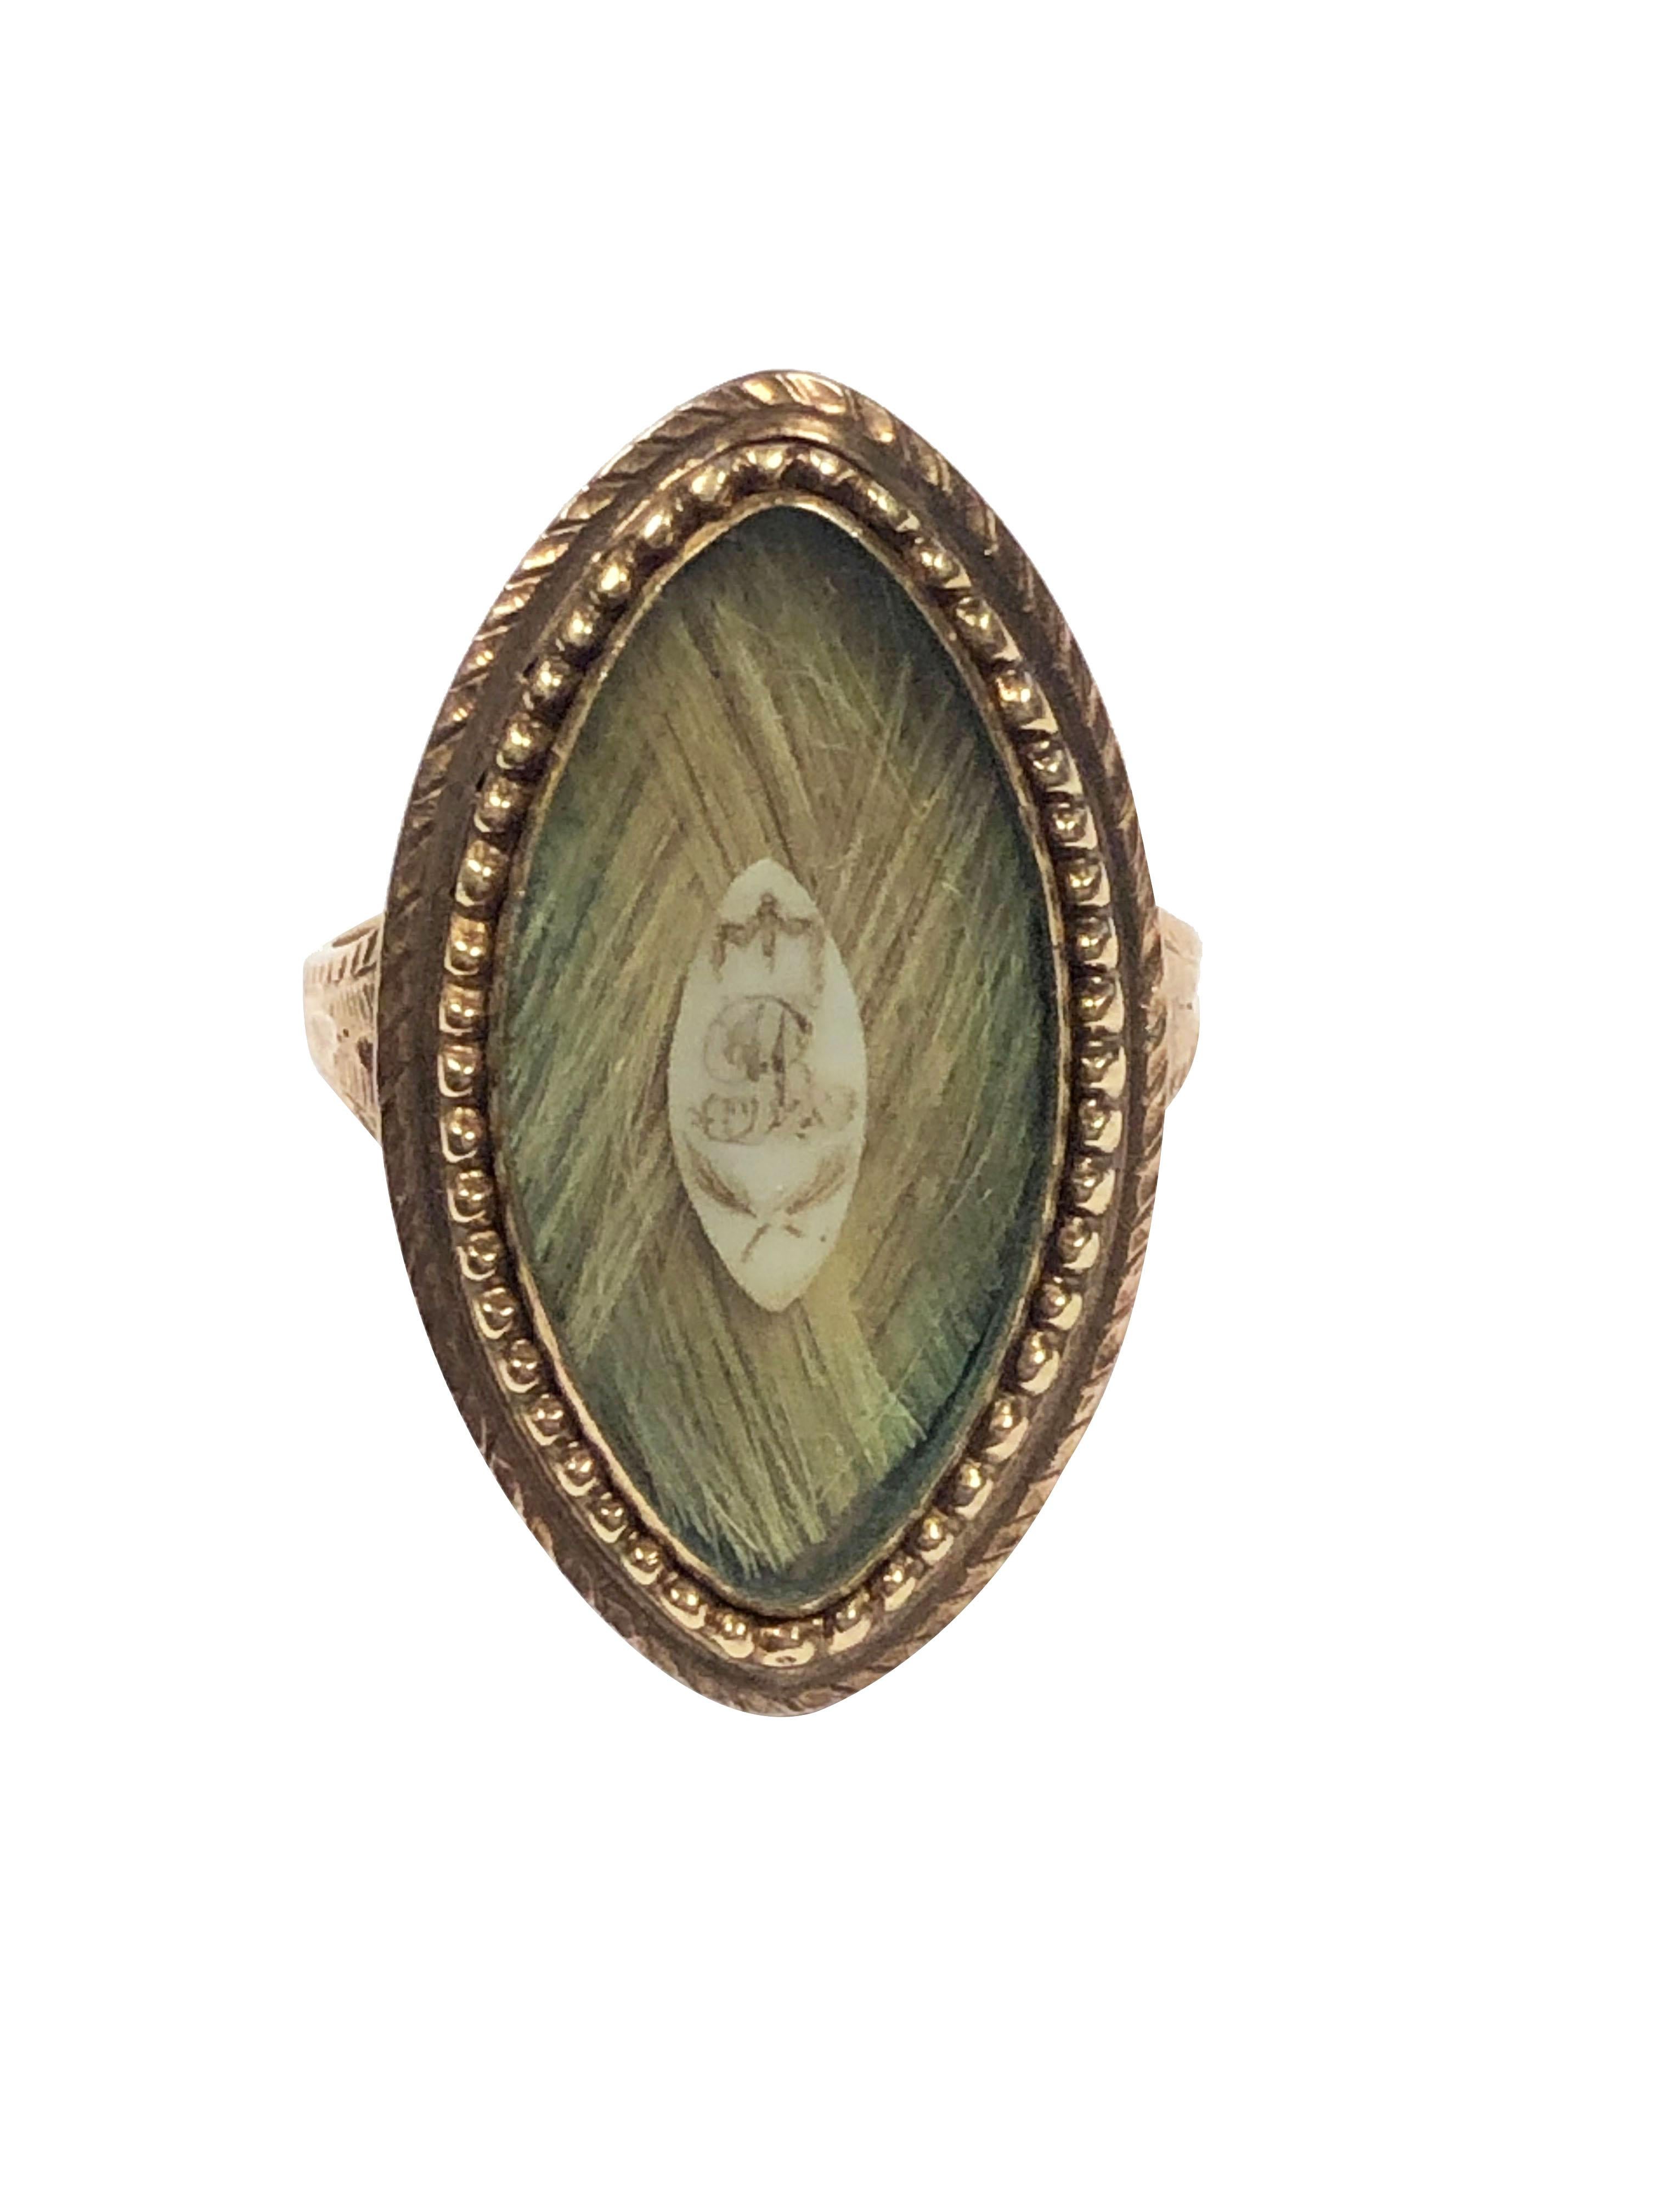 Circa 1850 14 - 15k Yellow Gold Mourning Memorial ring, in a Navette shape measuring 1 1/8 inch in length X 5/8 inch wide, light color woven hair with a center plaque with the letter 